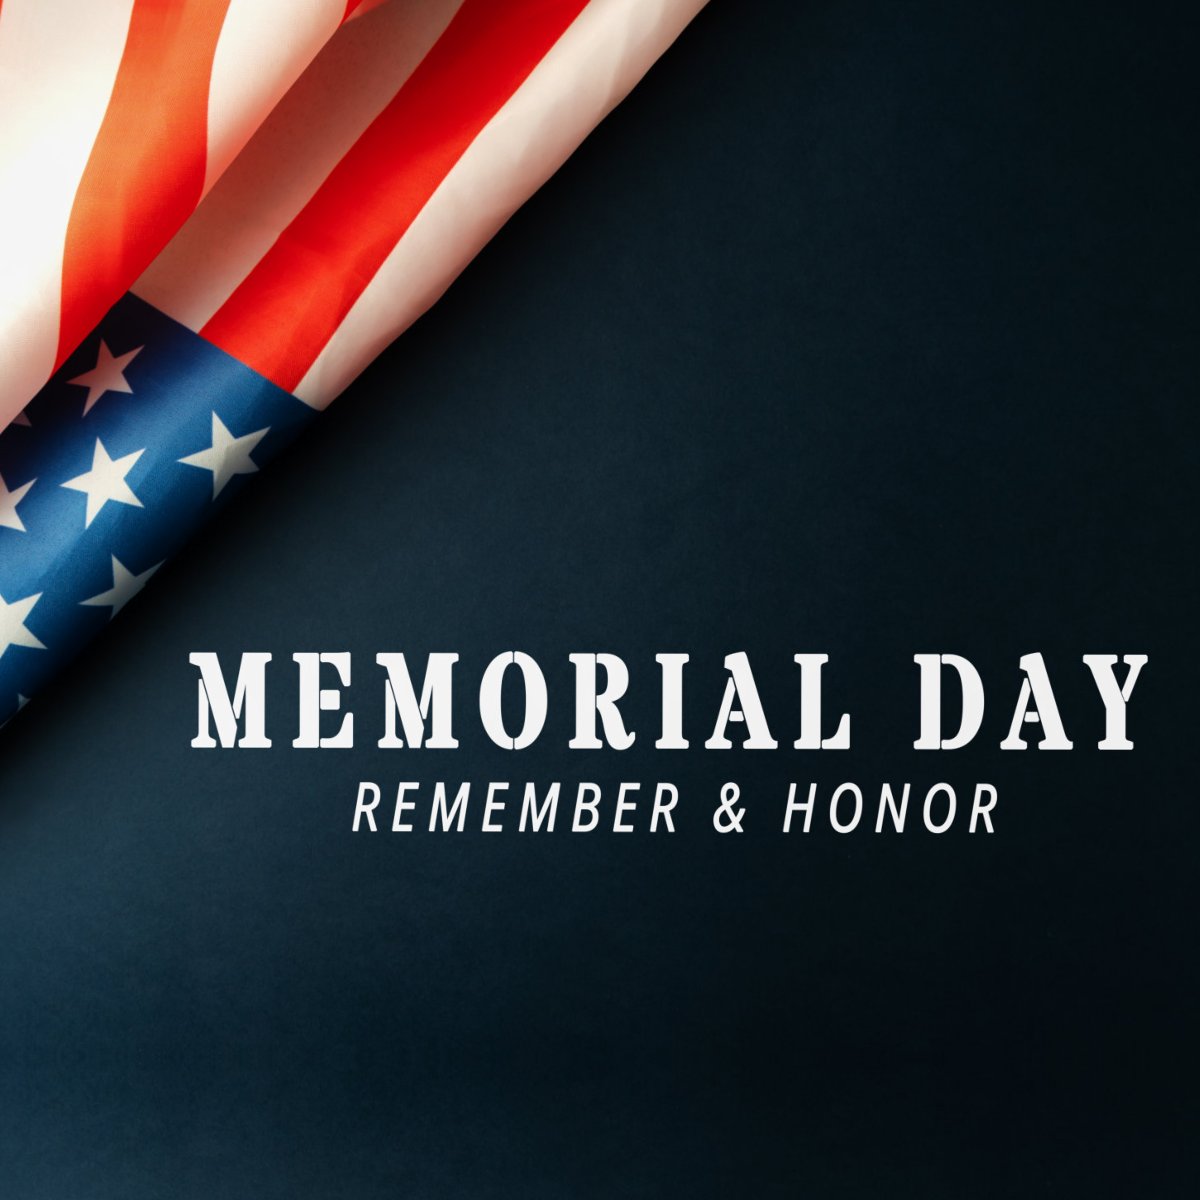 Enjoy the Peace

Today, we honor and remember the brave military people who sacrificed their lives so we can live freely and peacefully. We hope you’ll share your gratitude as well this Memorial Day!

#FairfaxVA #HealthcareServices #MemorialDay